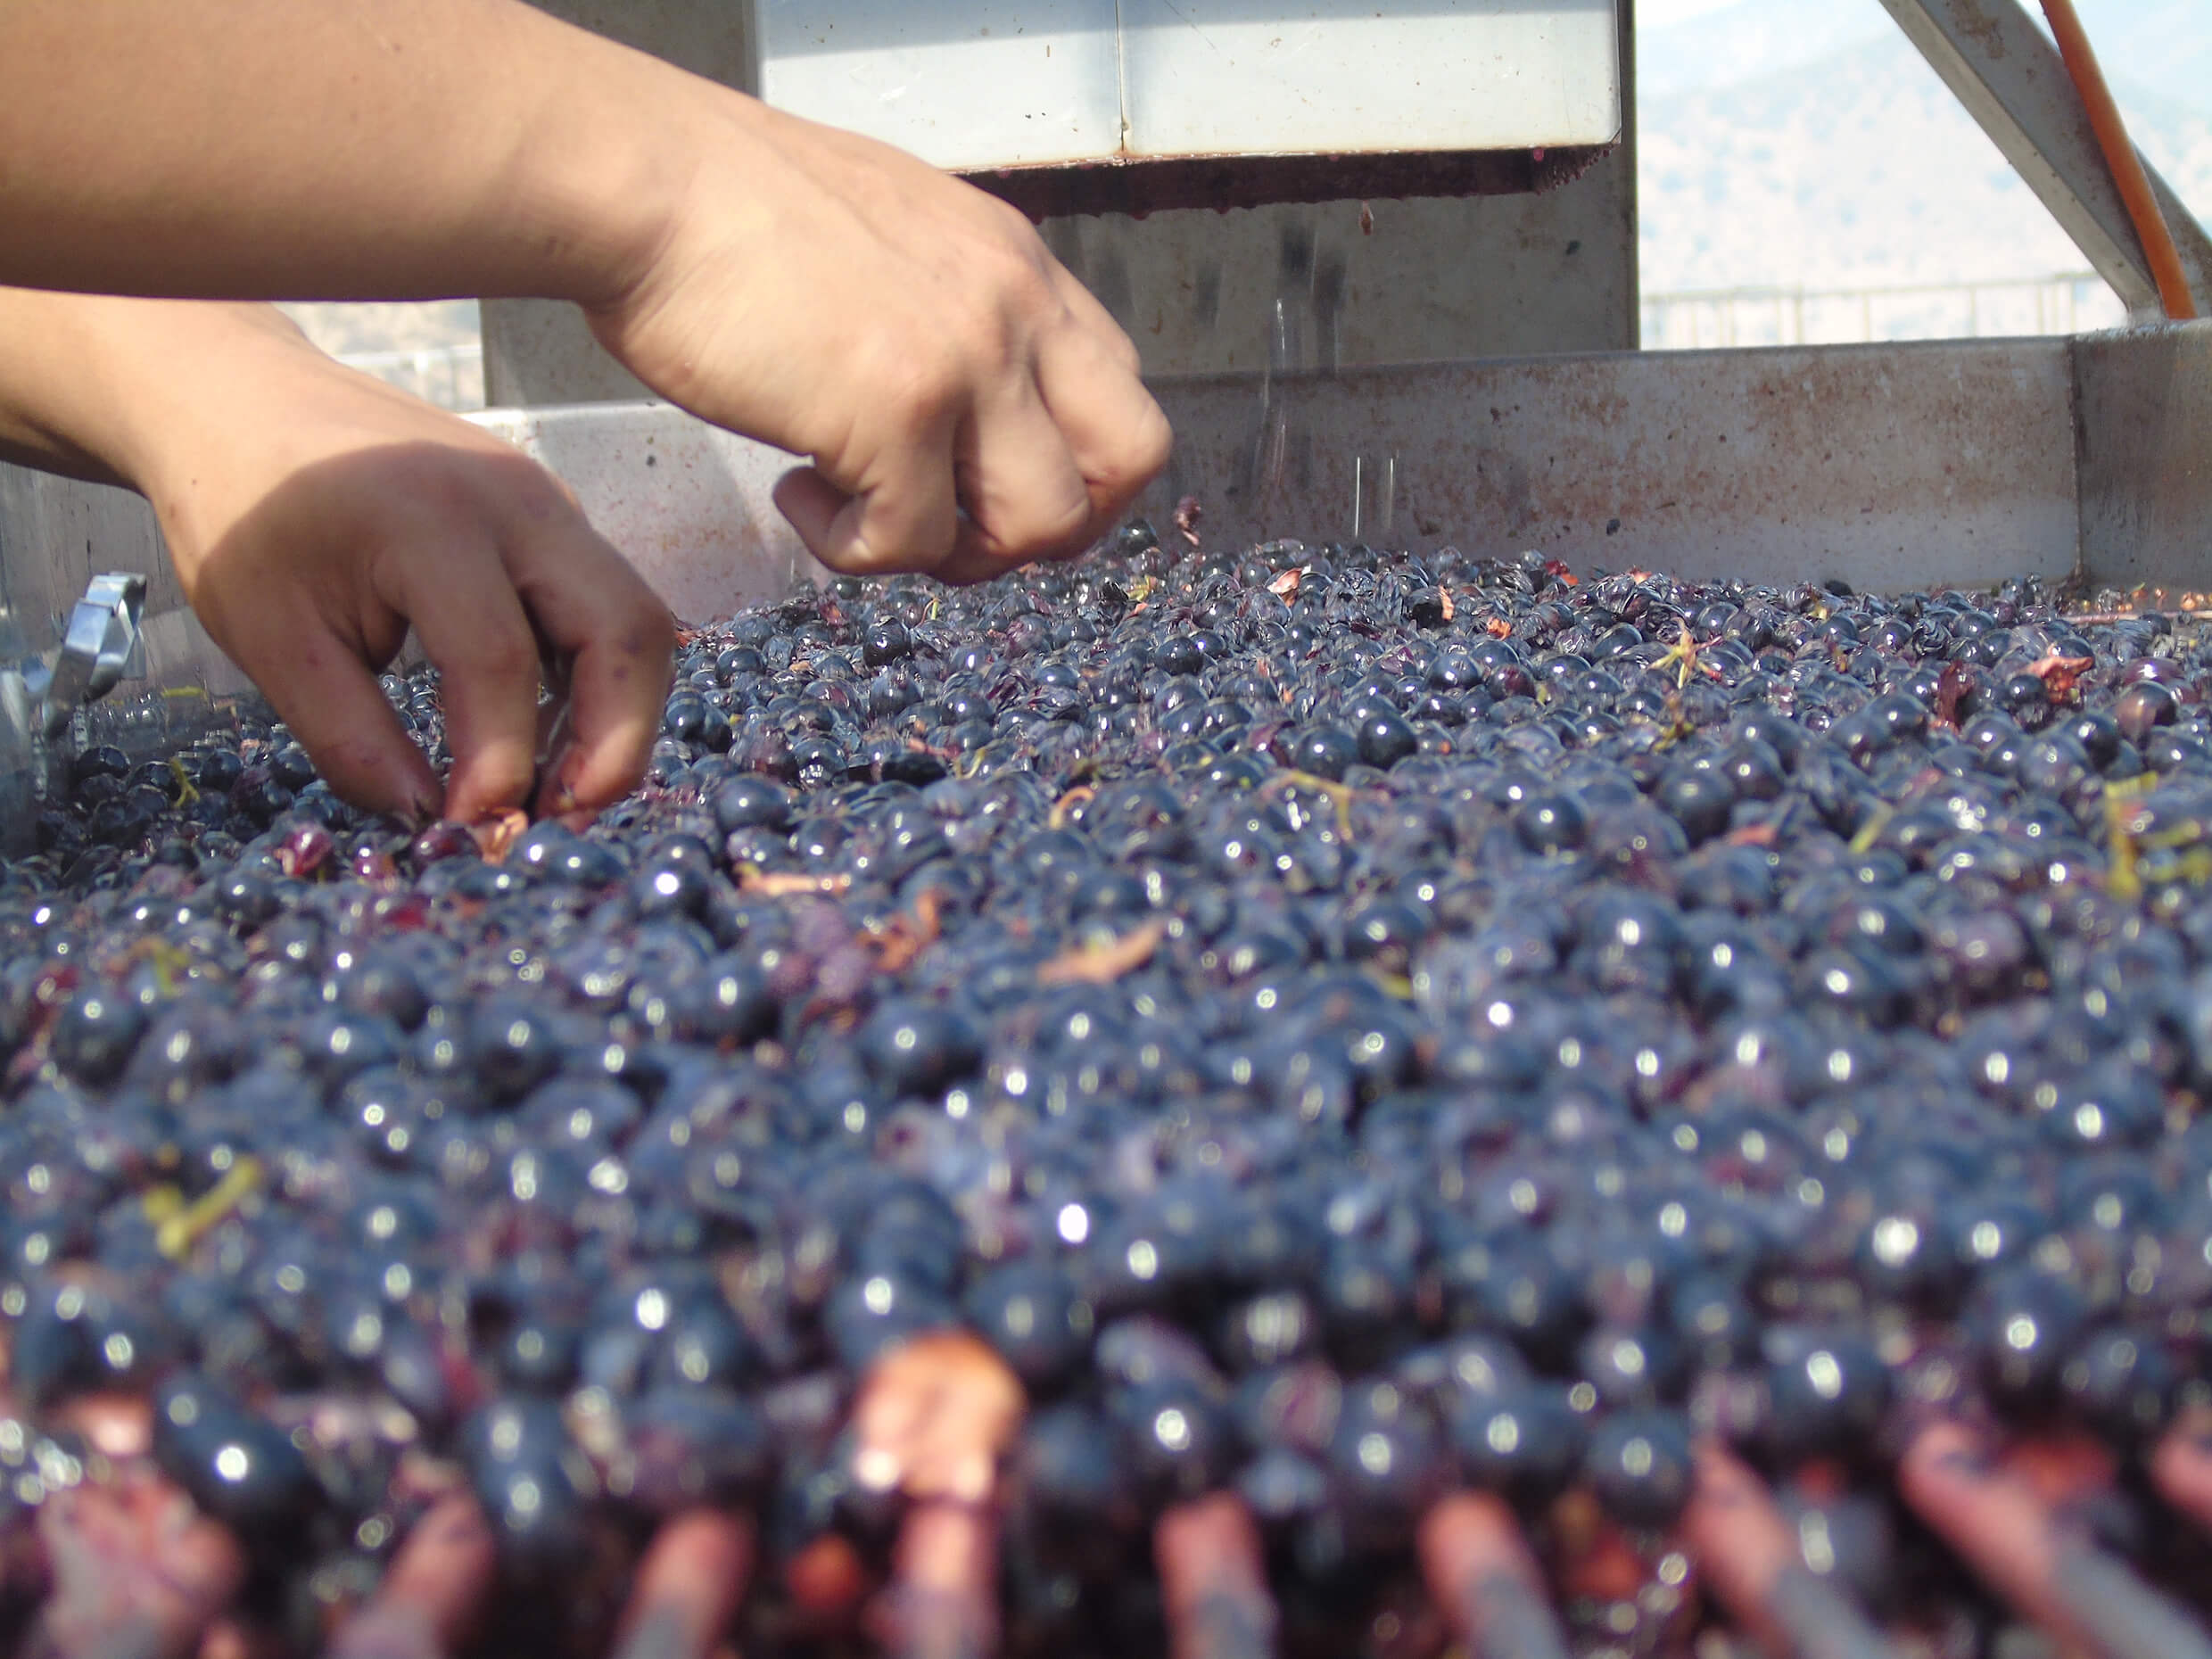 Hand checking red grapes on a conveyor at the winery